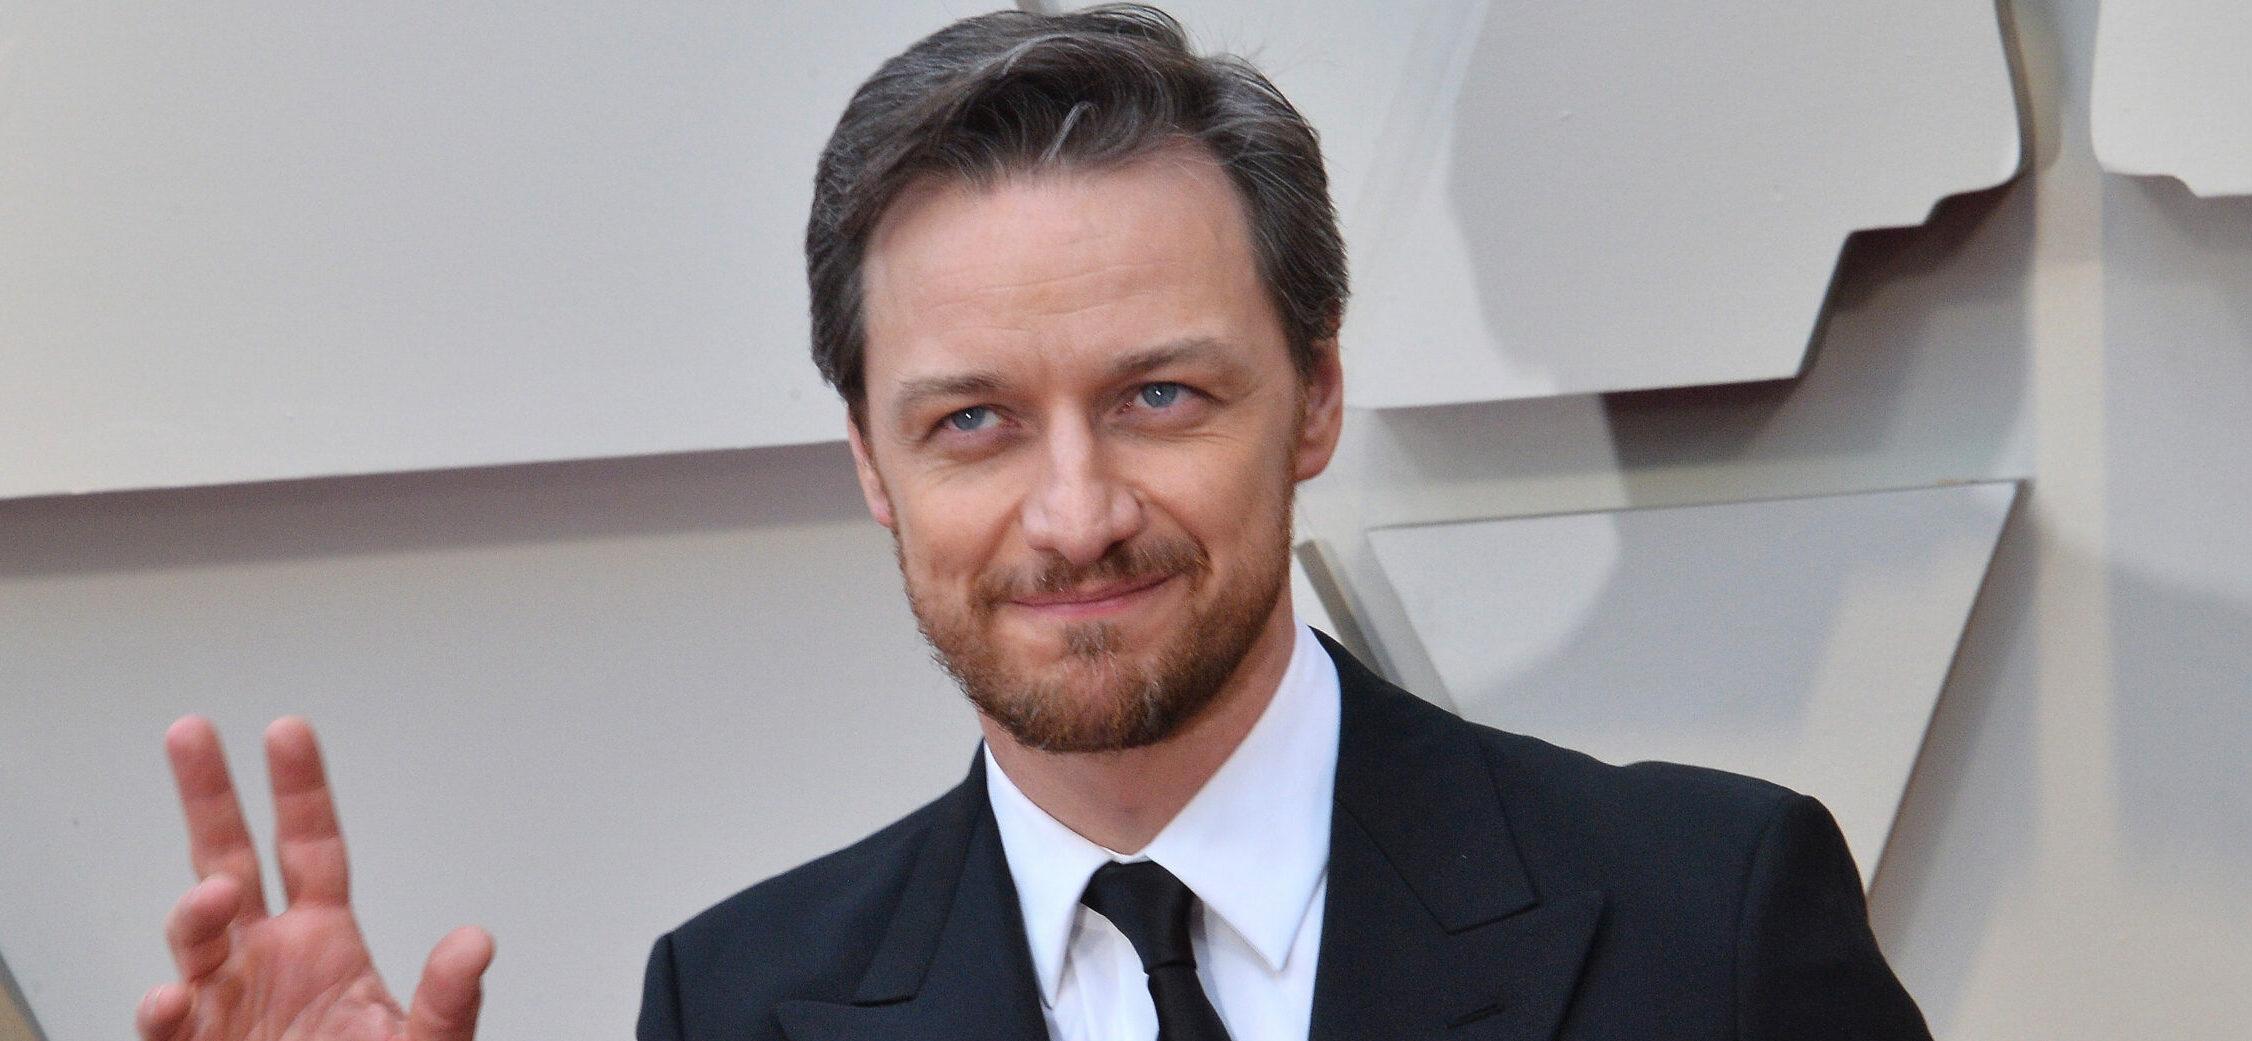 James McAvoy arrives on the red carpet for the 91st annual Academy Awards at the Dolby Theatre in the Hollywood section of Los Angeles.